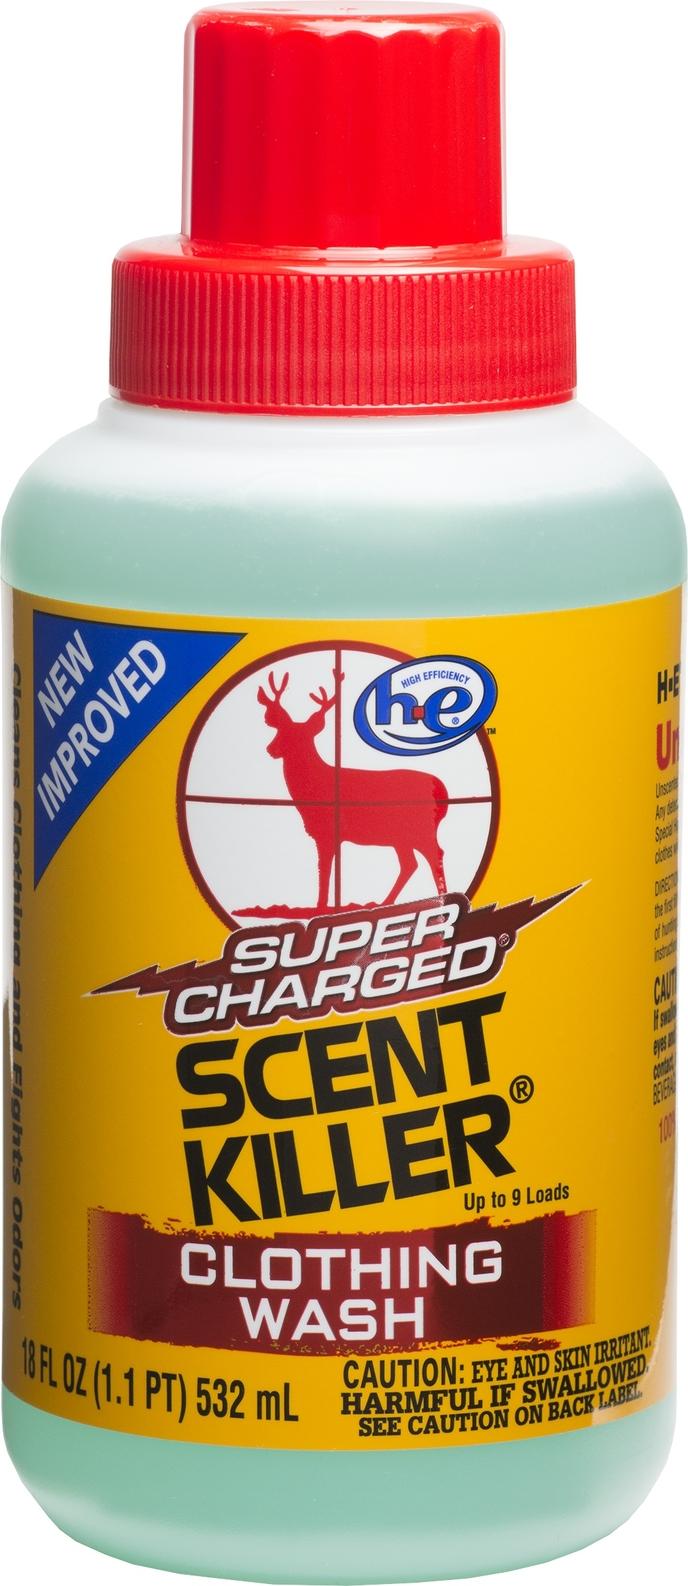 Super Charged® Scent Killer® Liquid Clothing Wash